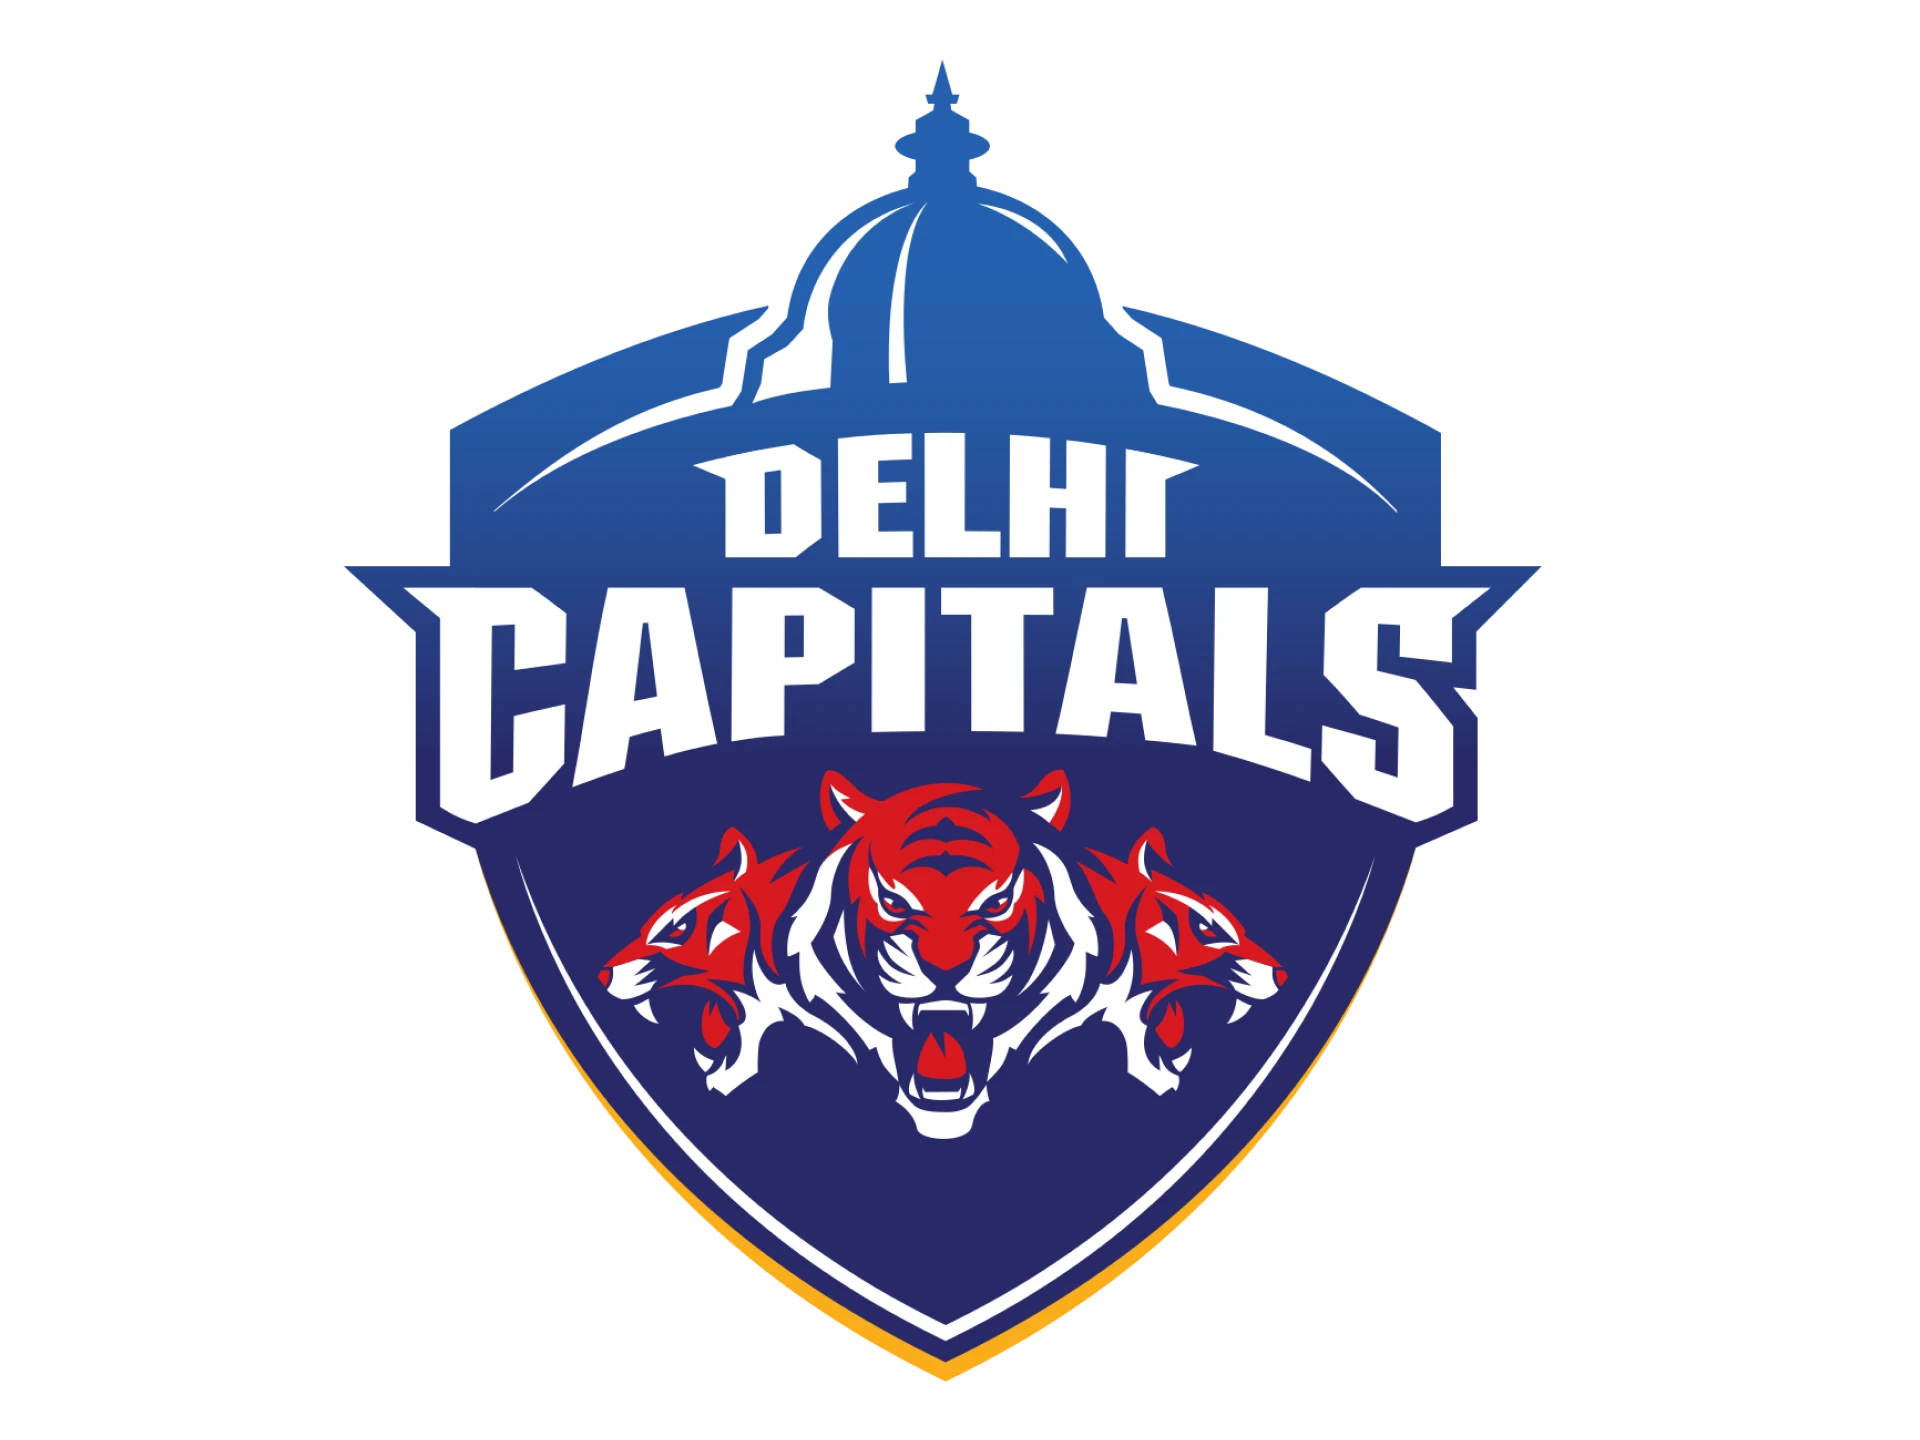 Try betting on Delhi Capitals in IPL.